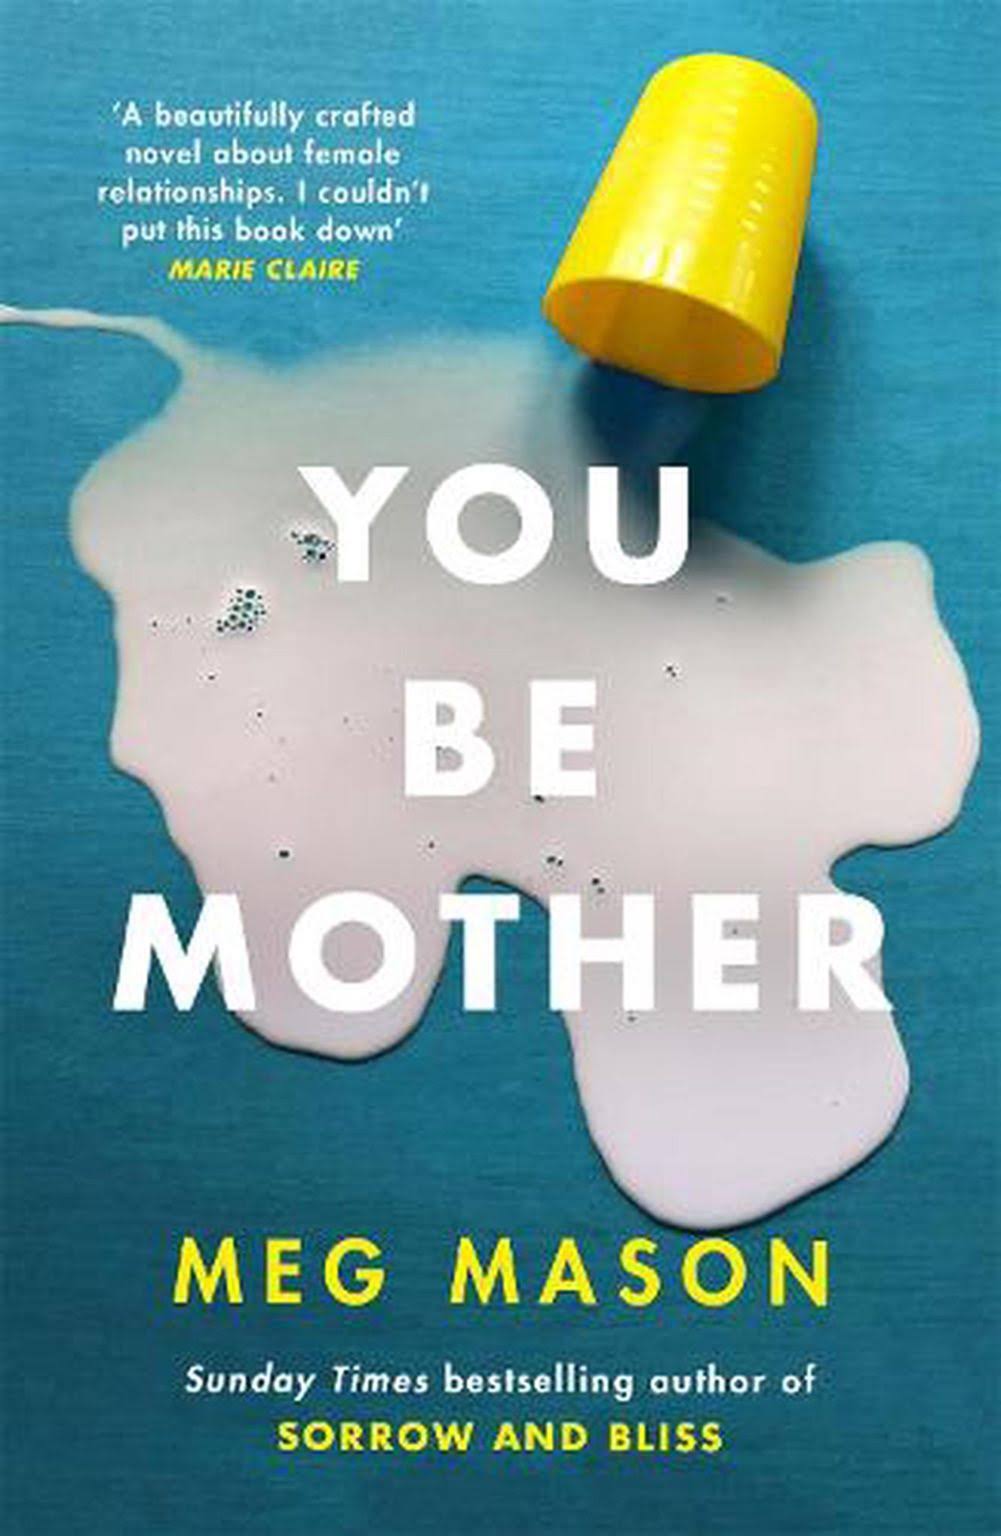 You Be Mother: The Debut Novel from the Author of Sorrow and Bliss [Book]